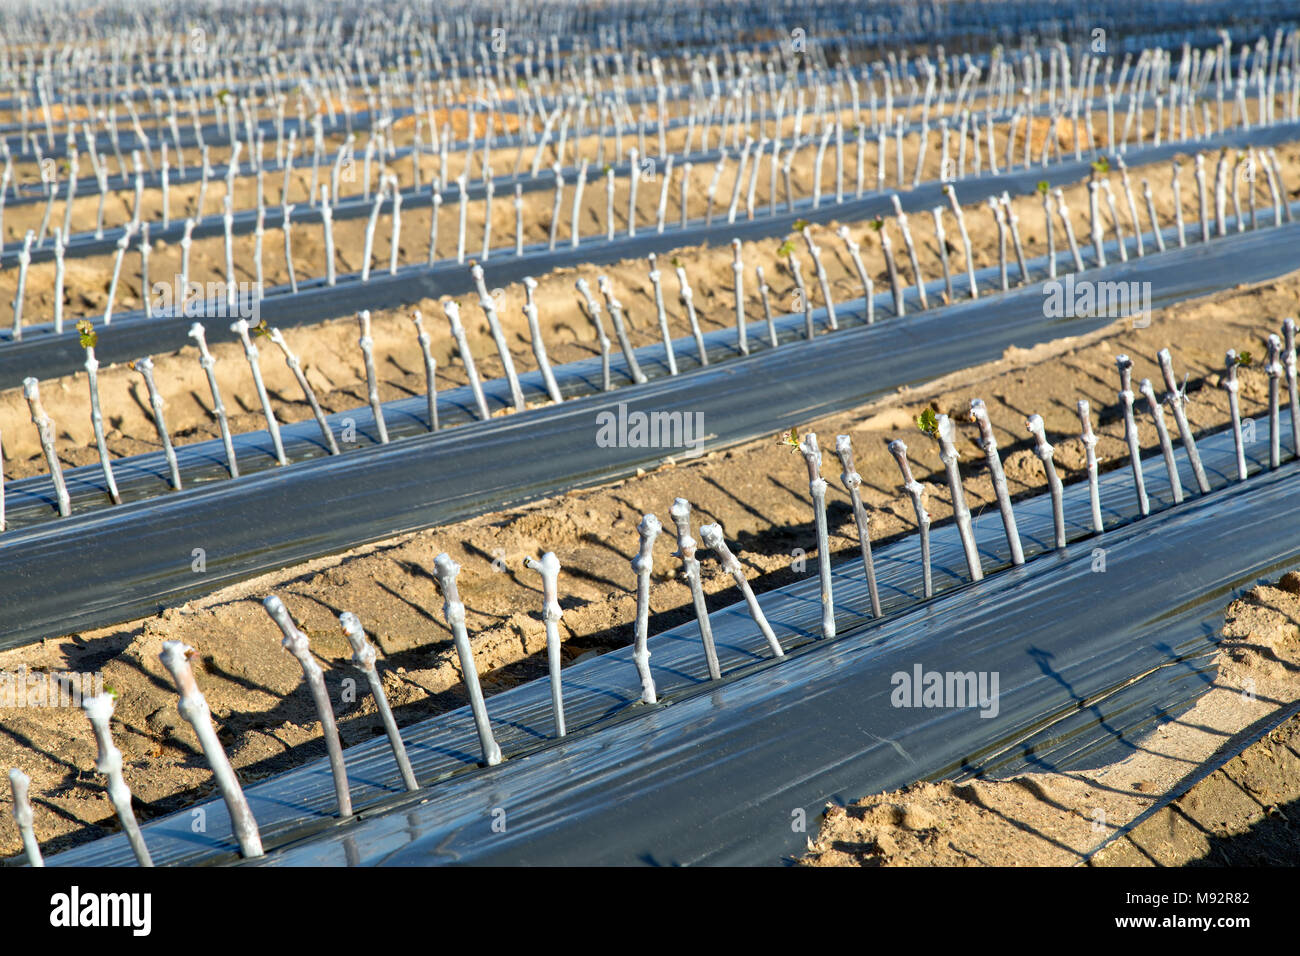 Rows of grafted & waxed grape cuttings planted in field. Stock Photo